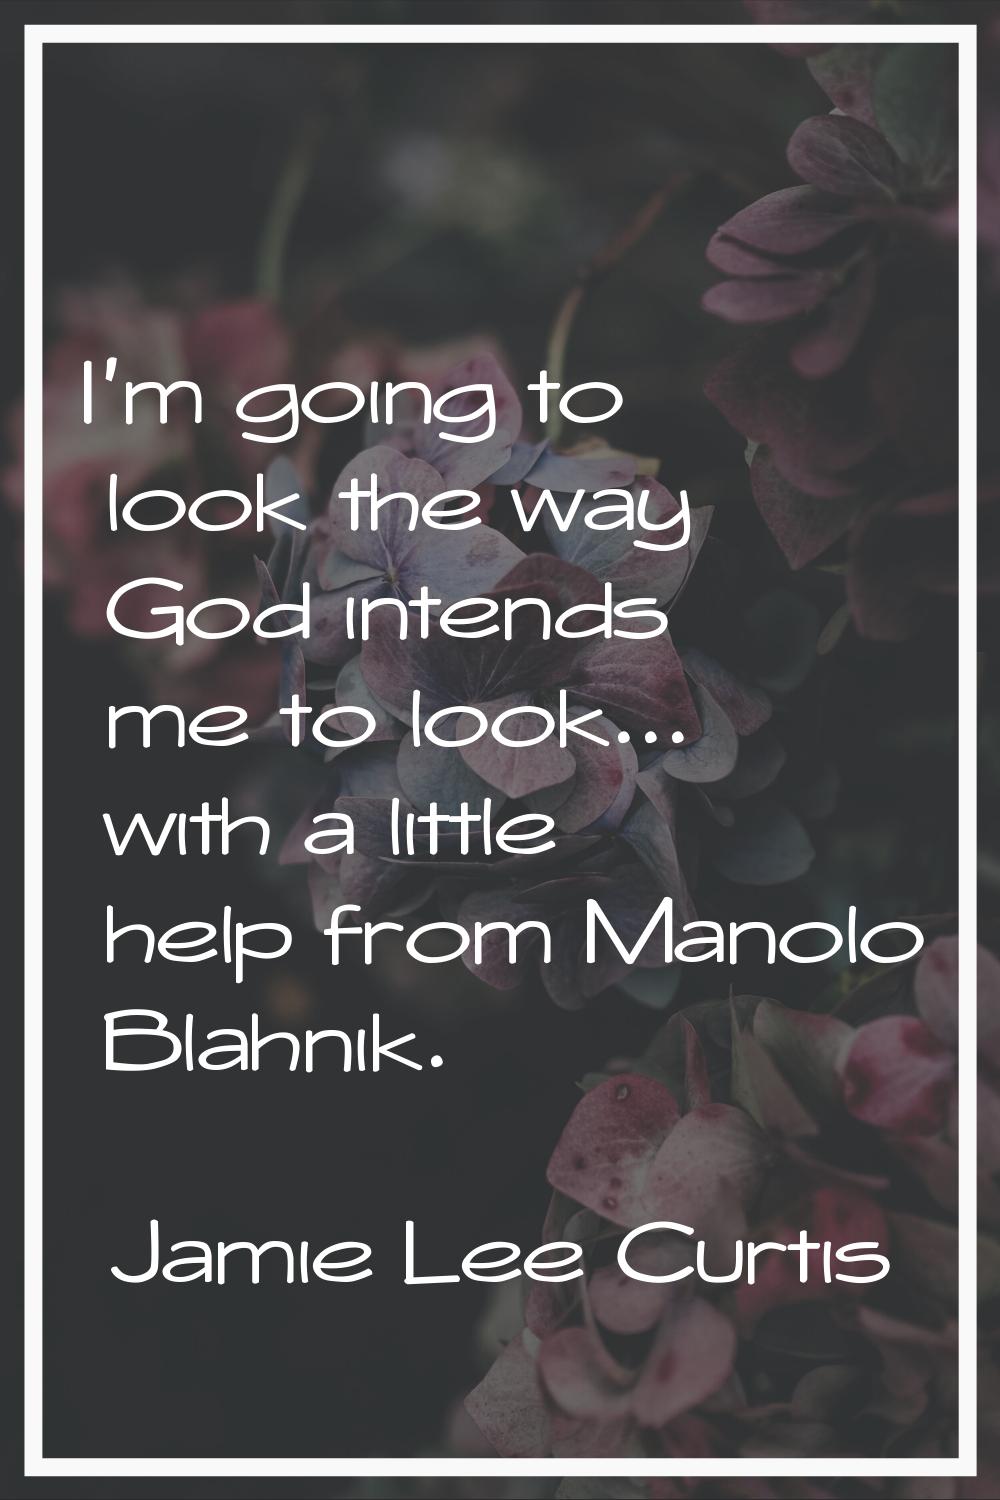 I'm going to look the way God intends me to look... with a little help from Manolo Blahnik.